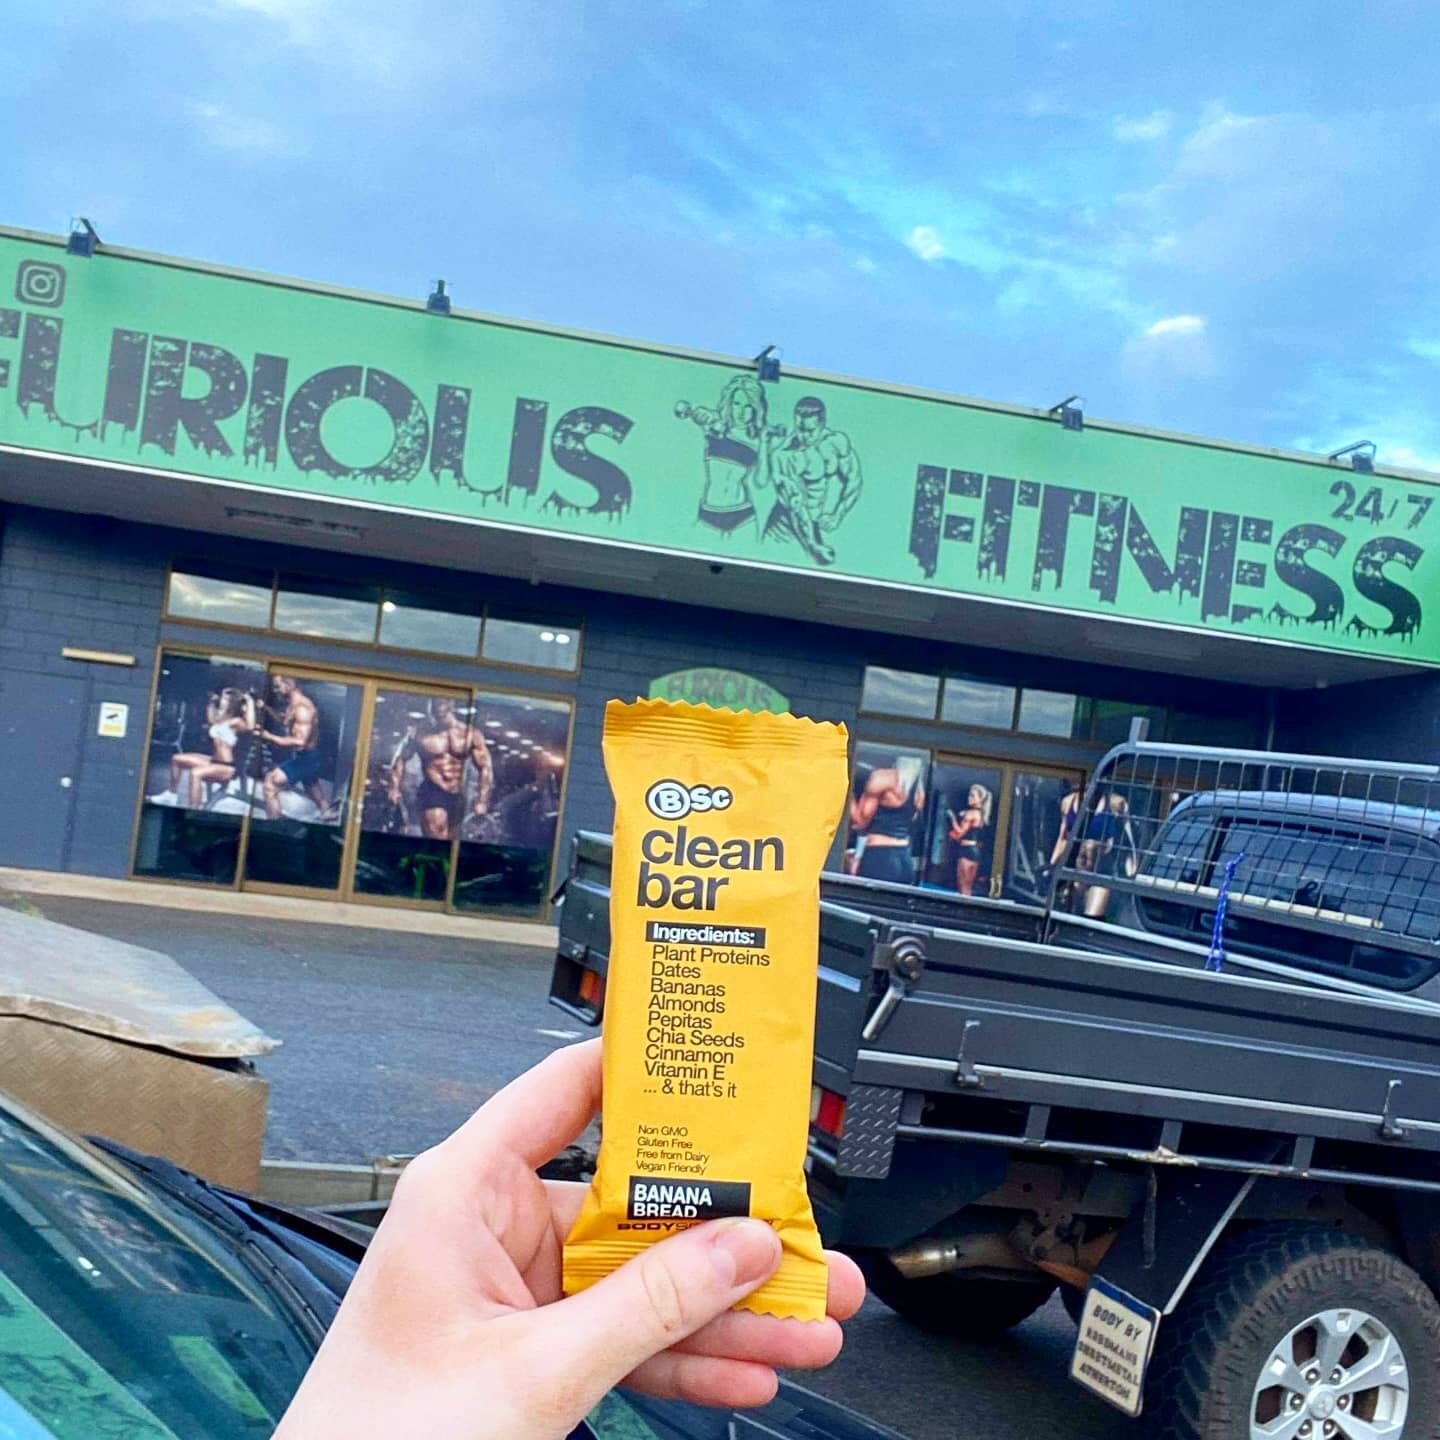 Post gym session at @furiousfitness247 for Amber, our Atherton Dietitian 💪

These clean bars help us to re-fuel after an intense training session 💦 

All plant based and gluten free ingredients, a good source of protein and carbohydrates, and lower